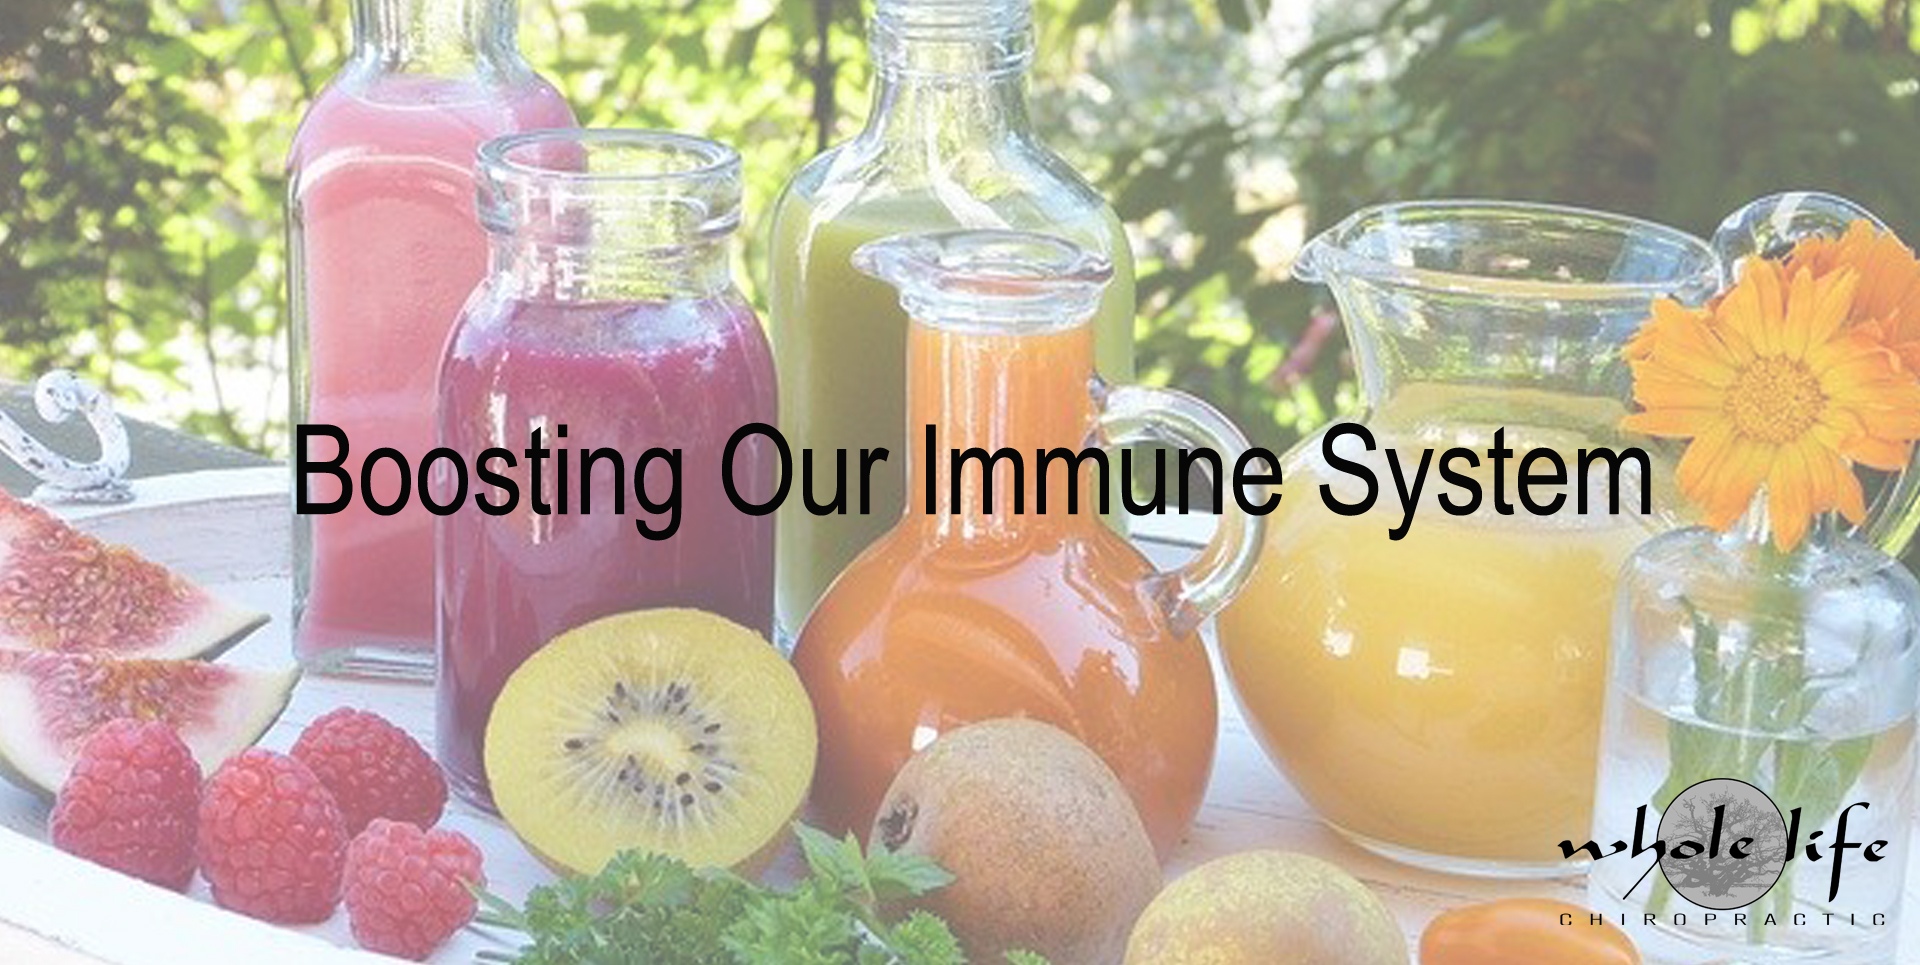 Whole Life Chiropractic April 2020 Newsletter Boosting Our Immune System